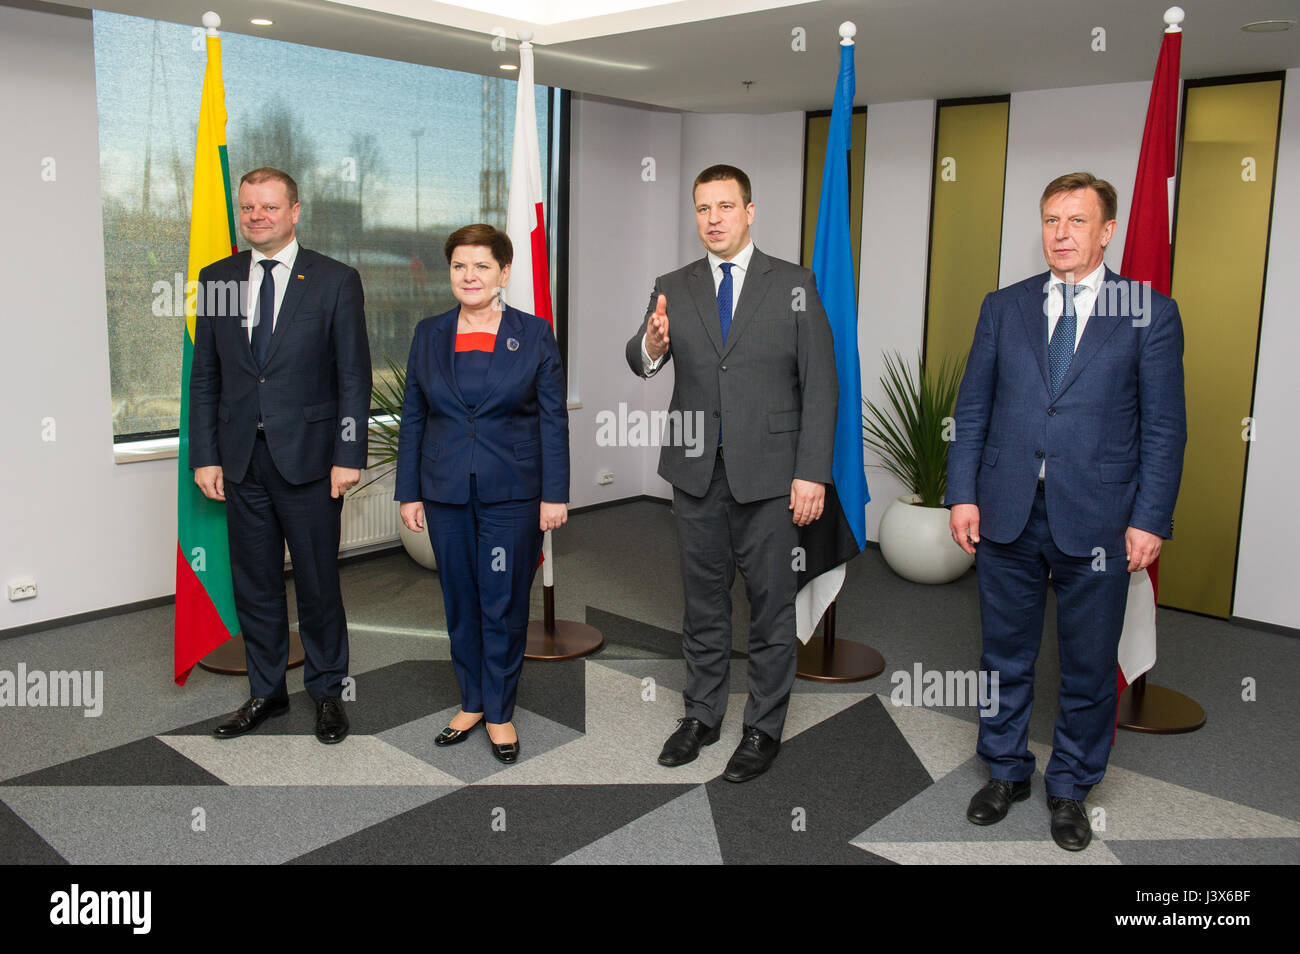 Tallinn, Estonia, 8th May 2017. Prime Minister of Estonia Juri Ratas (2nd R), Prime Minister of Latvia Maris Kucinskis (R), Prime Minister of Lithuania Saulius Skvernelis (L) and Prime Minister of Poland Beata Szydlo(2nd L) pose for a family photo prior their meeting in Tallinn. The topics of the meeting were regional security, energy community, transport connections and the future of the European Union. Credit: Nicolas Bouvy/Alamy Live News Stock Photo